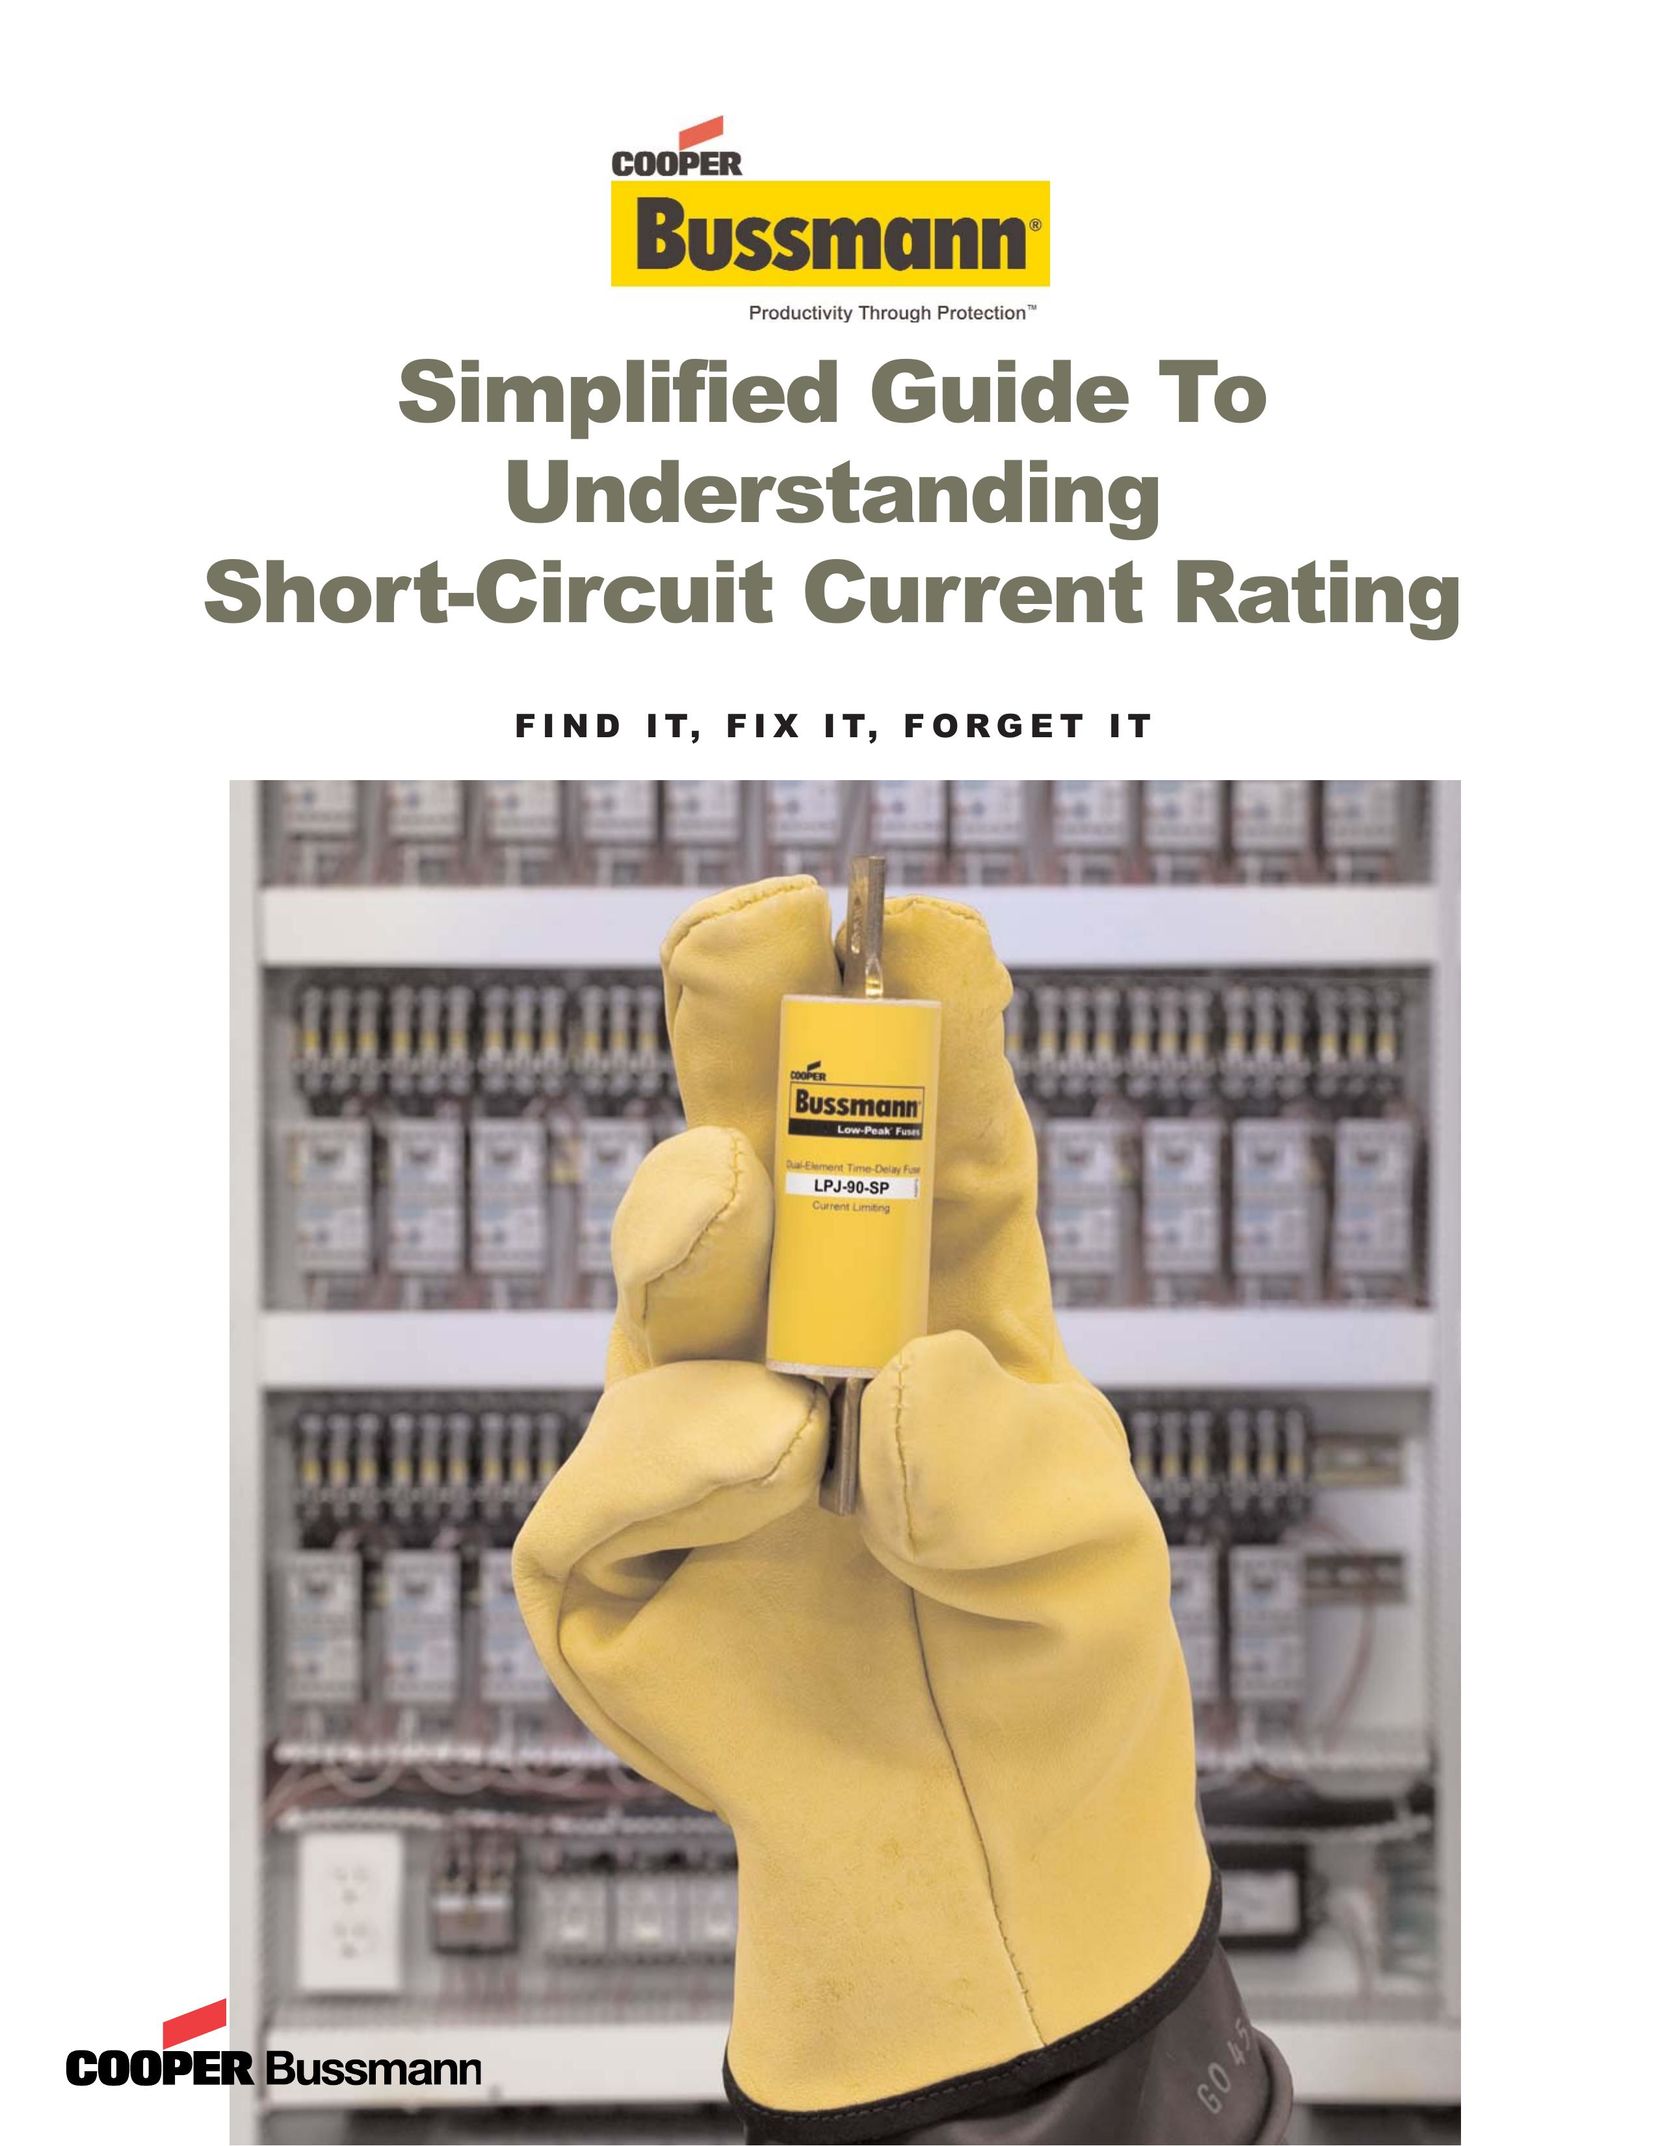 Cooper Bussmann Electronics Short-Circuit Current Rating Switch User Manual